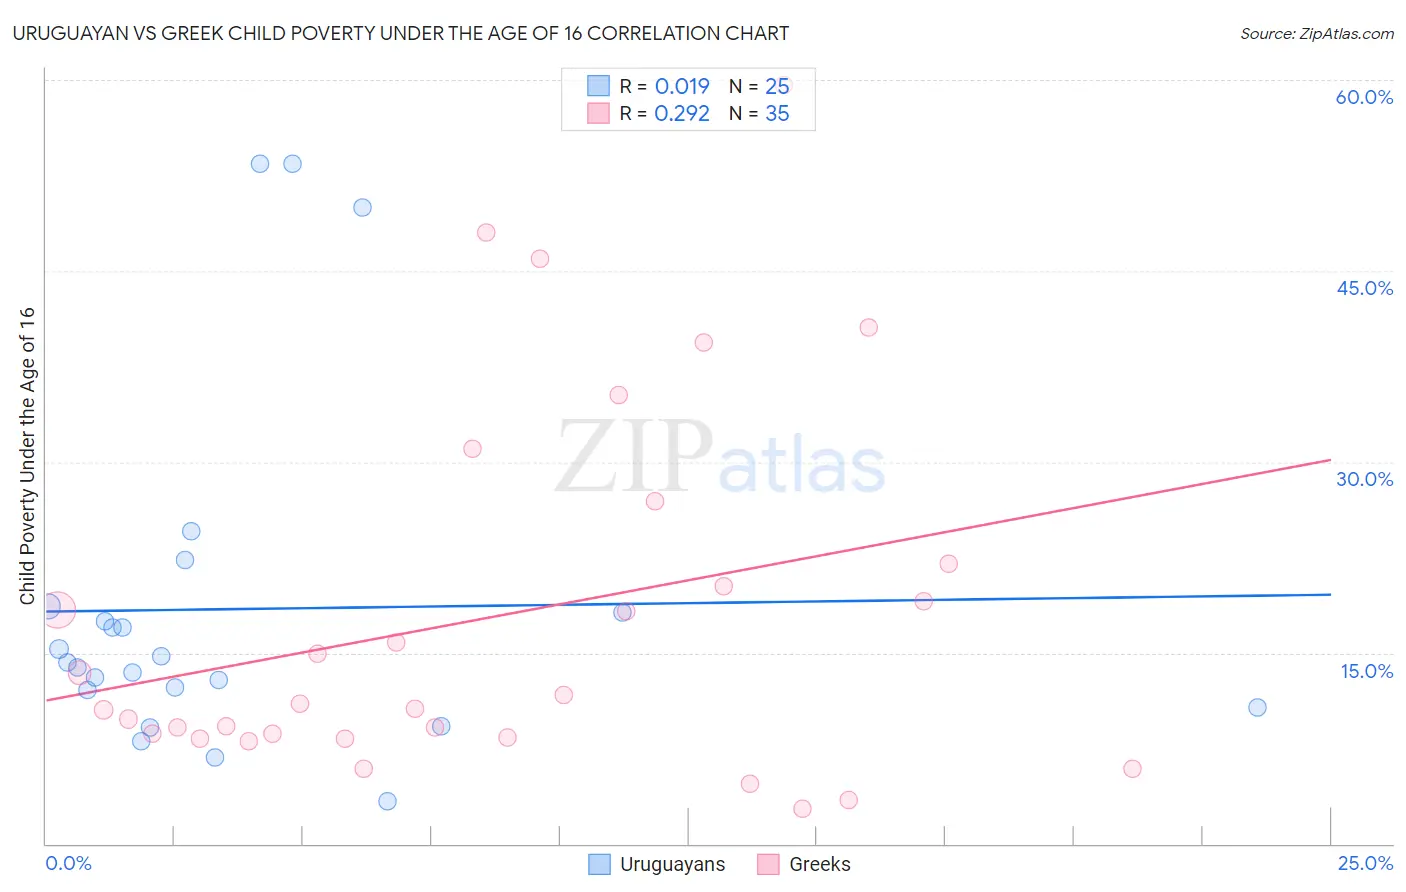 Uruguayan vs Greek Child Poverty Under the Age of 16